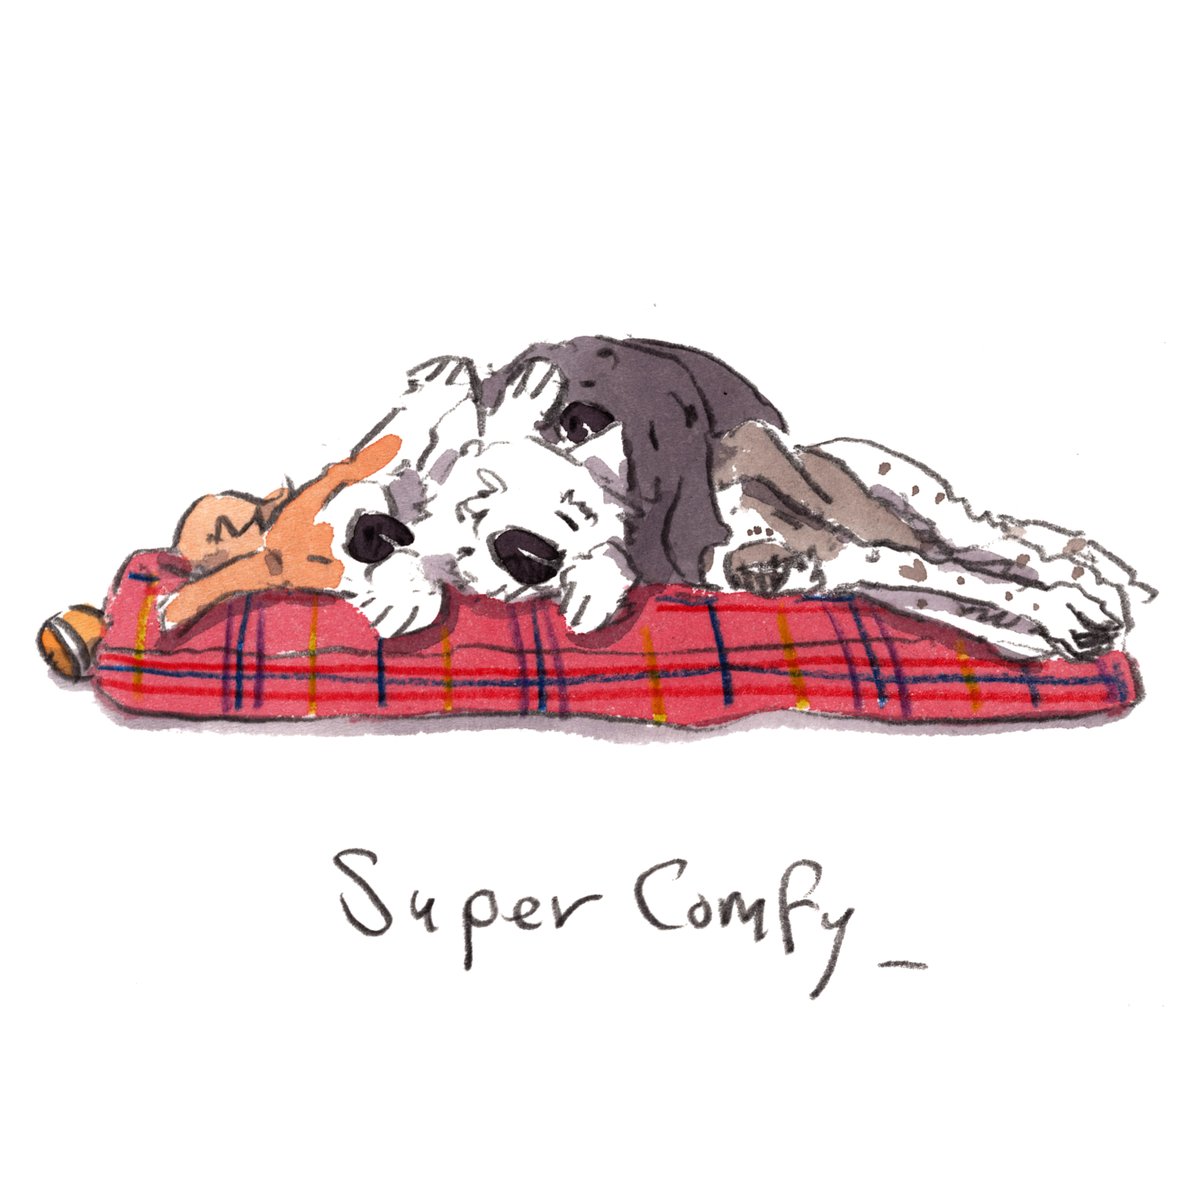 Good night, lovely people and lovely dogs.
The team are super comfy.
Sleep well and sweet dreams.
I hope that you have a really lovely day tomorrow. 
#hoorayfordogs #beagle #westie #labrador #springer #redsquirrel #supercomfy